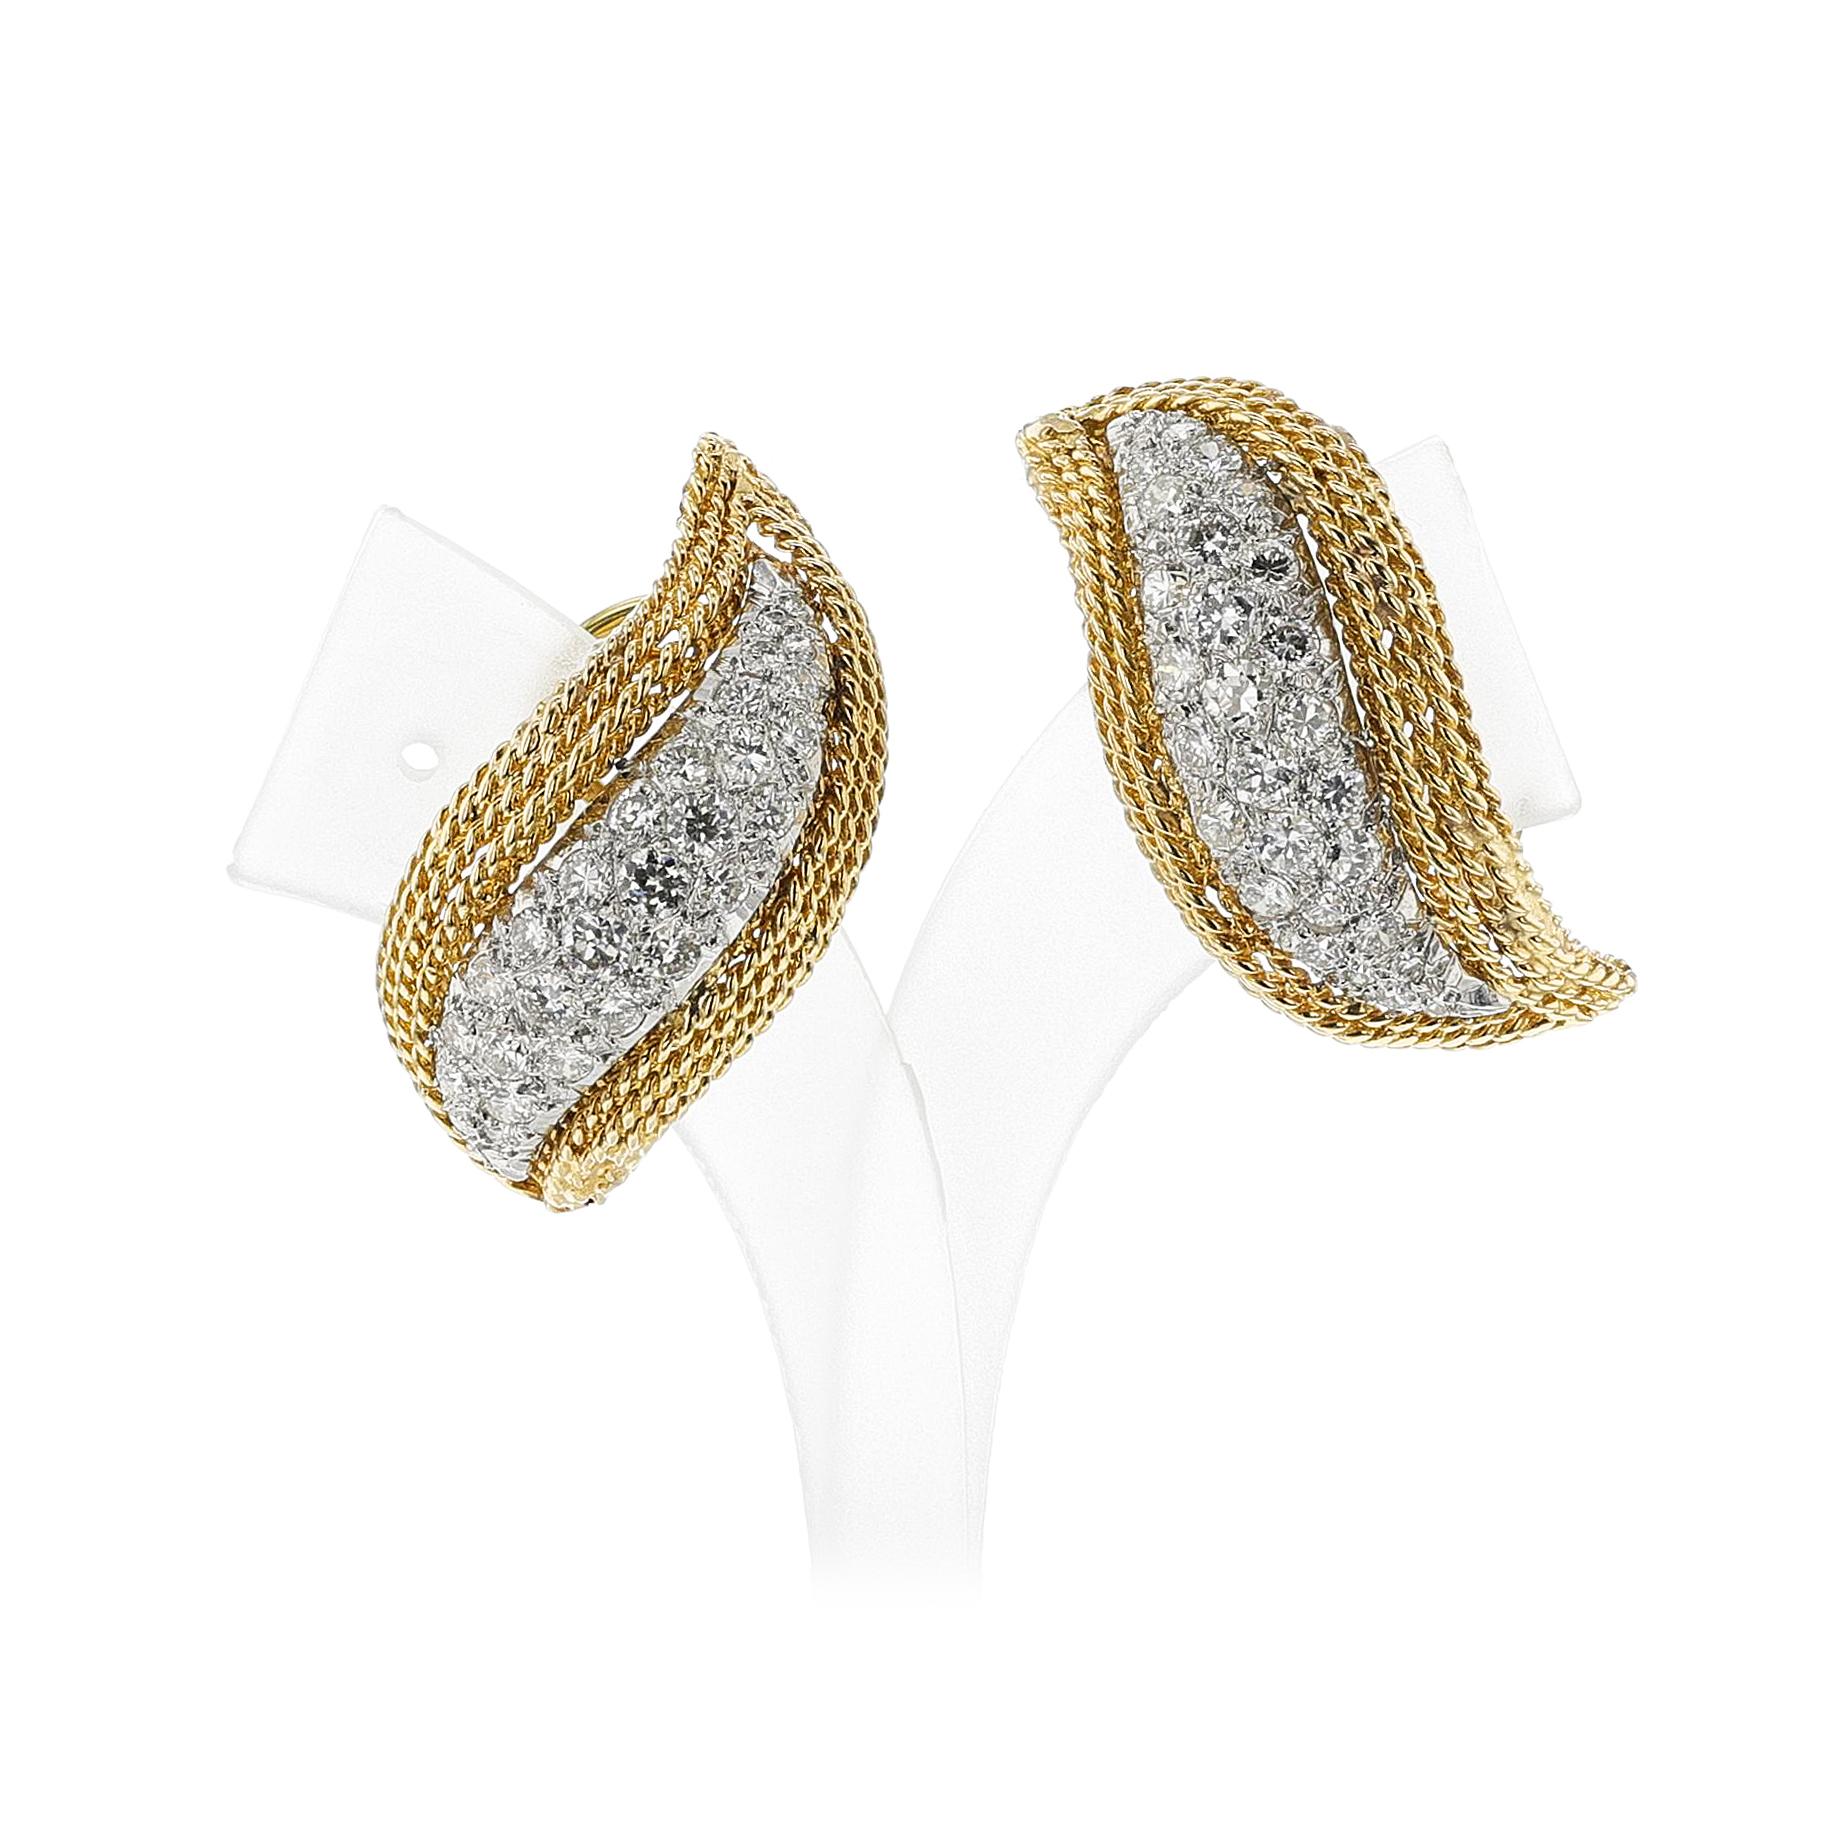 A pair of Diamond and Gold Earrings made in 18k Gold. Pavé-set with full and old European-cut diamonds, approximate total weight 2.40 carats, weight 14.36 gram. Length: 1 1/4 inches.

SKU: 1464